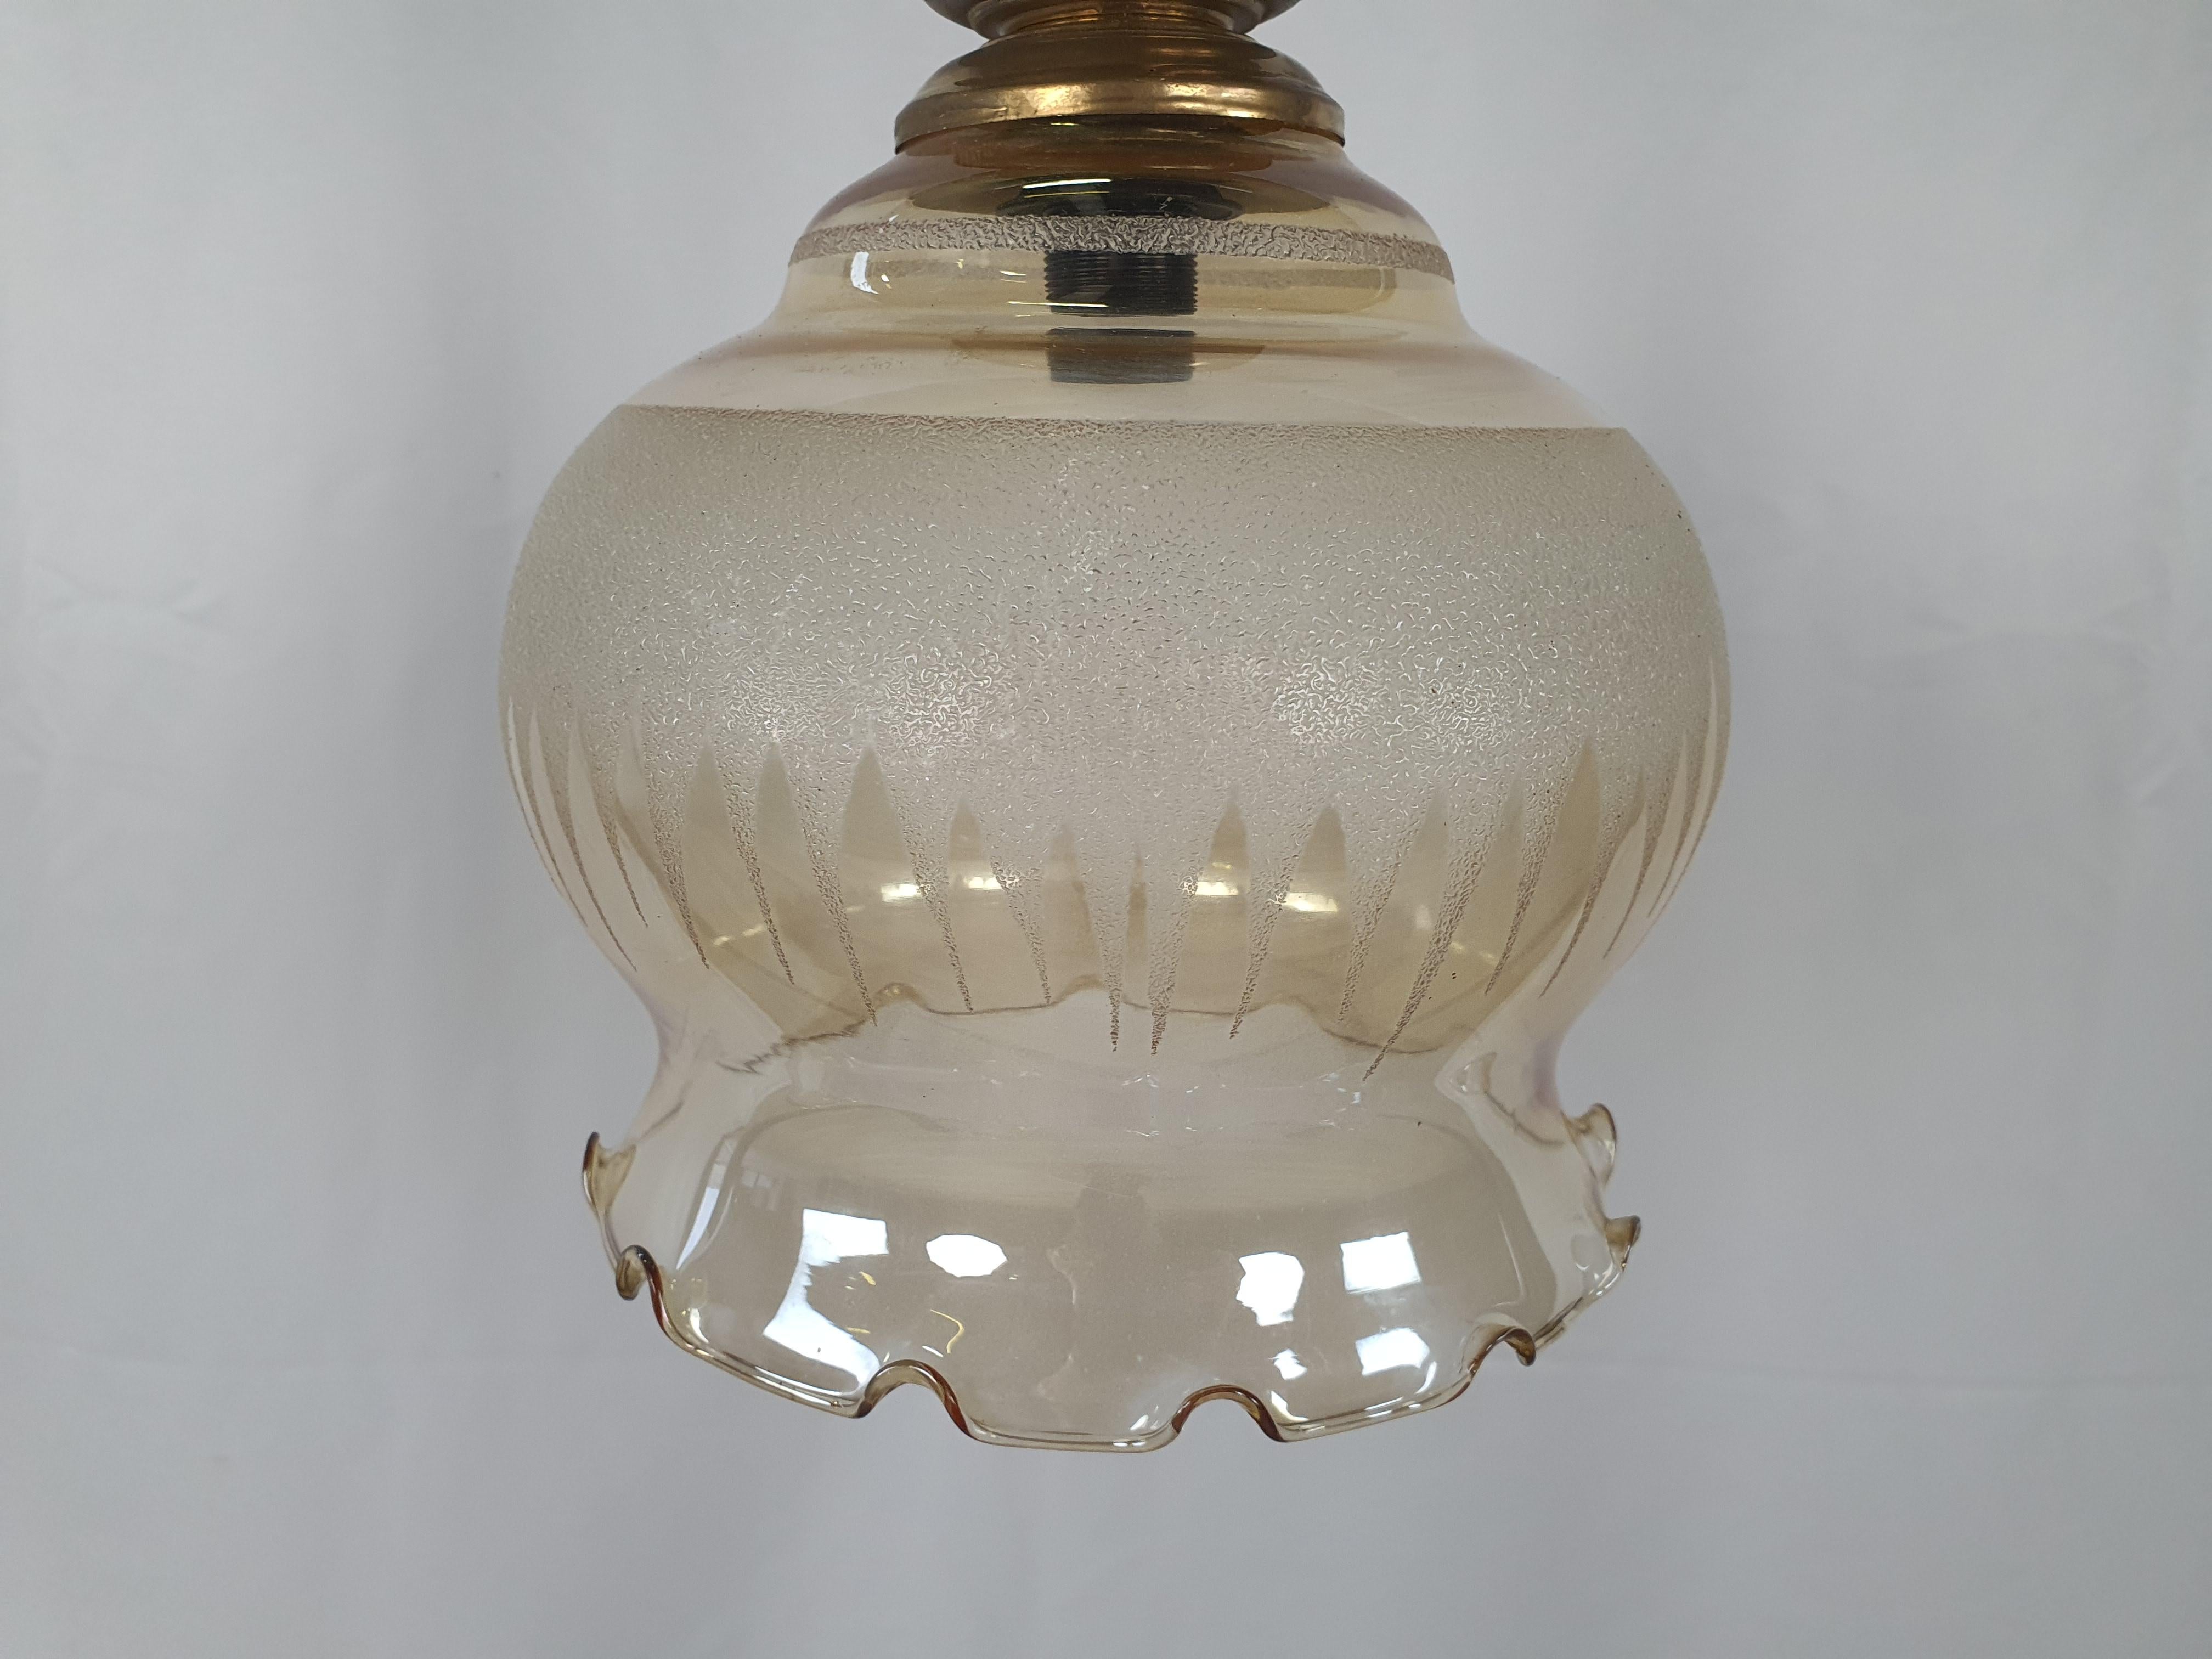 Vintage chandelier of Italian production from the 70s, entirely in decorated and worked glass with a brass wall structure.

The cable of this item is original and the replacement of electrical parts and/or the electrical system is recommended.